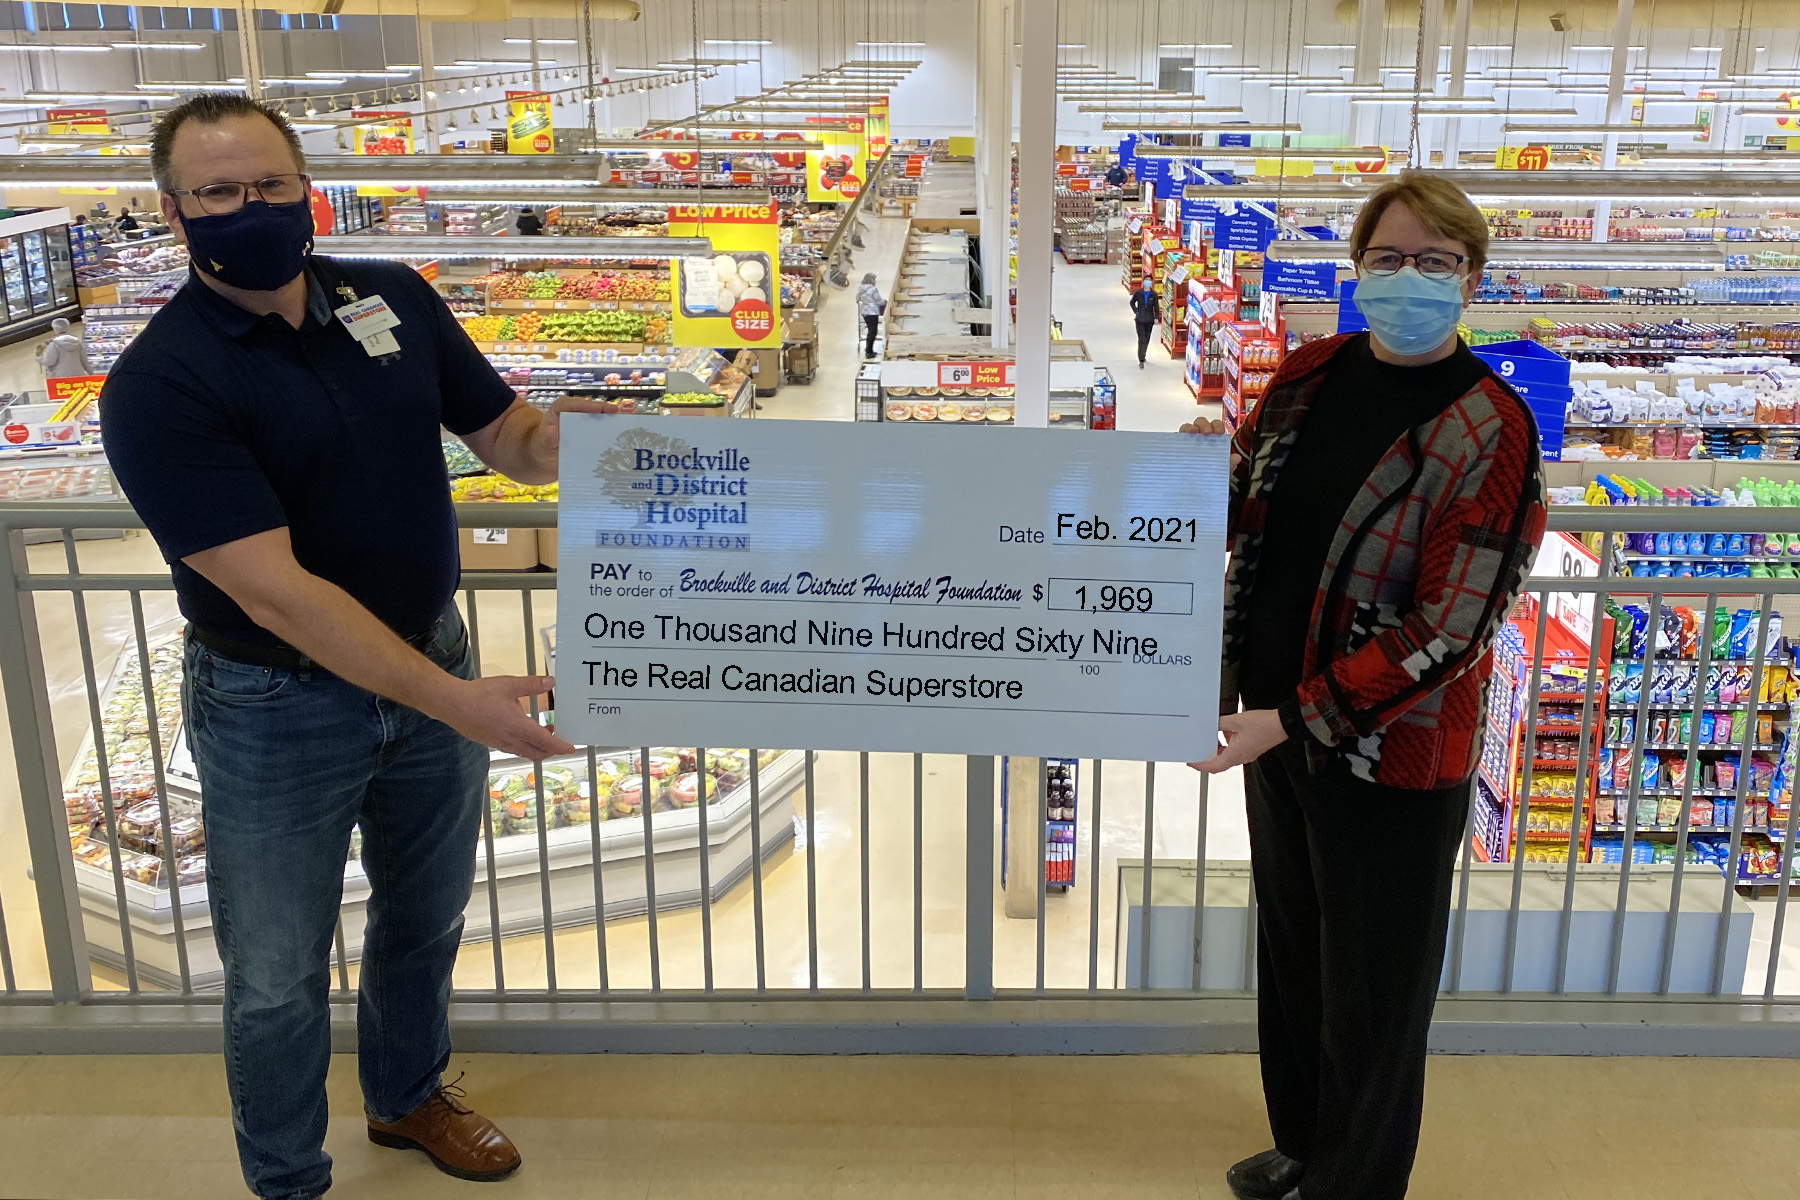 WITH THE BROCKVILLE REAL CANADIAN SUPERSTORE’S HELP A TOTAL OF $1,969 WAS RAISED DURING  THE BROCKVILLE AND DISTRICT HOSPITAL FOUNDATION’S “SHOW YOUR HEART” CAMPAIGN 